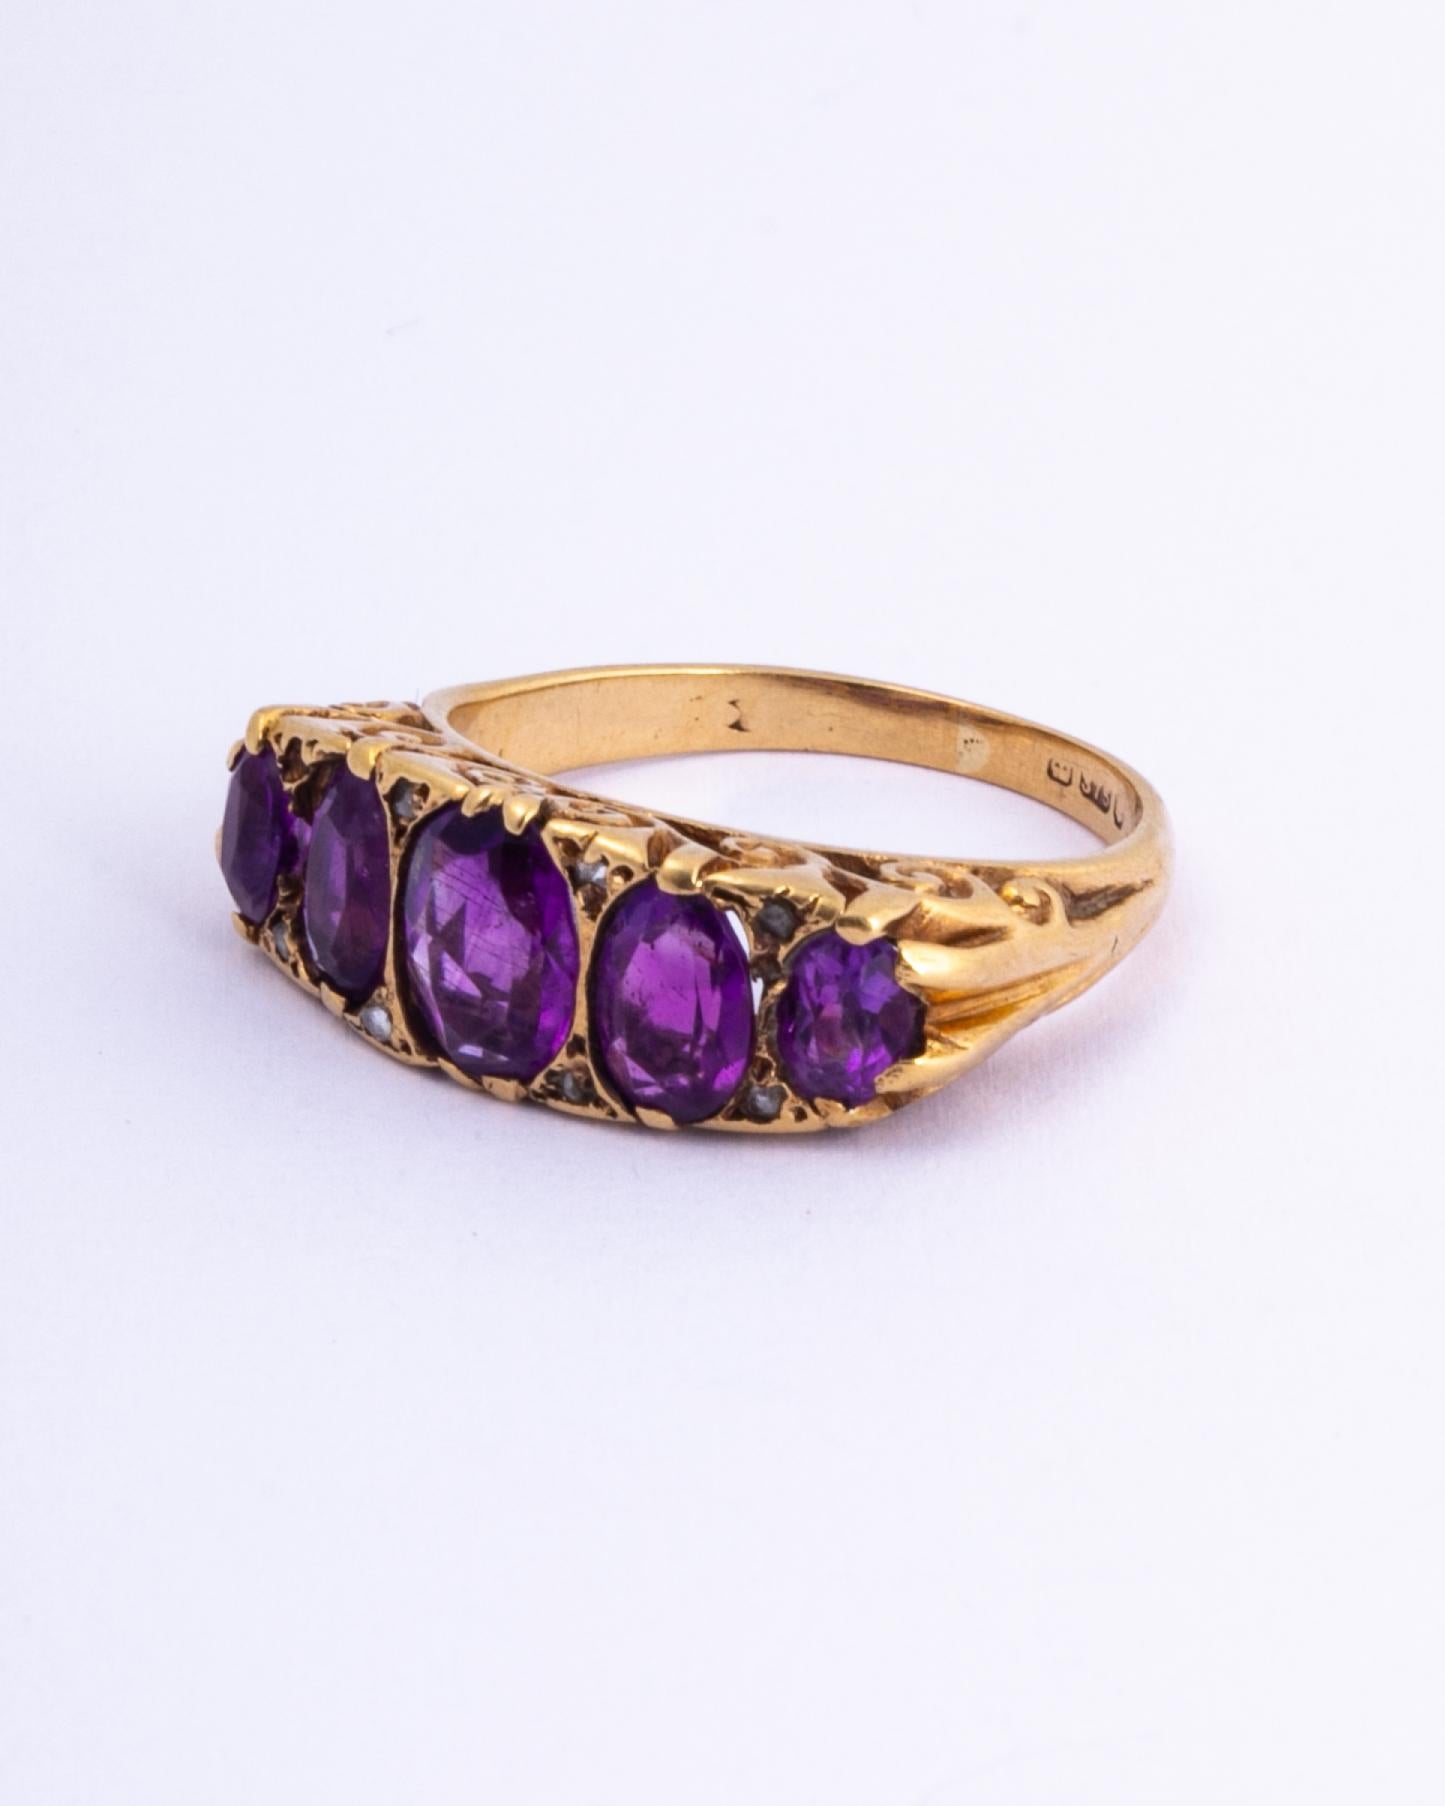 Not only does this ring hold five bright and sparkling amethyst but it also boasts diamond points. All stone are set in gold and have an ornate gallery. Even the shoulders on this ring have the swirl detail.

Ring Size: M or 6 1/4
Band Width (widest